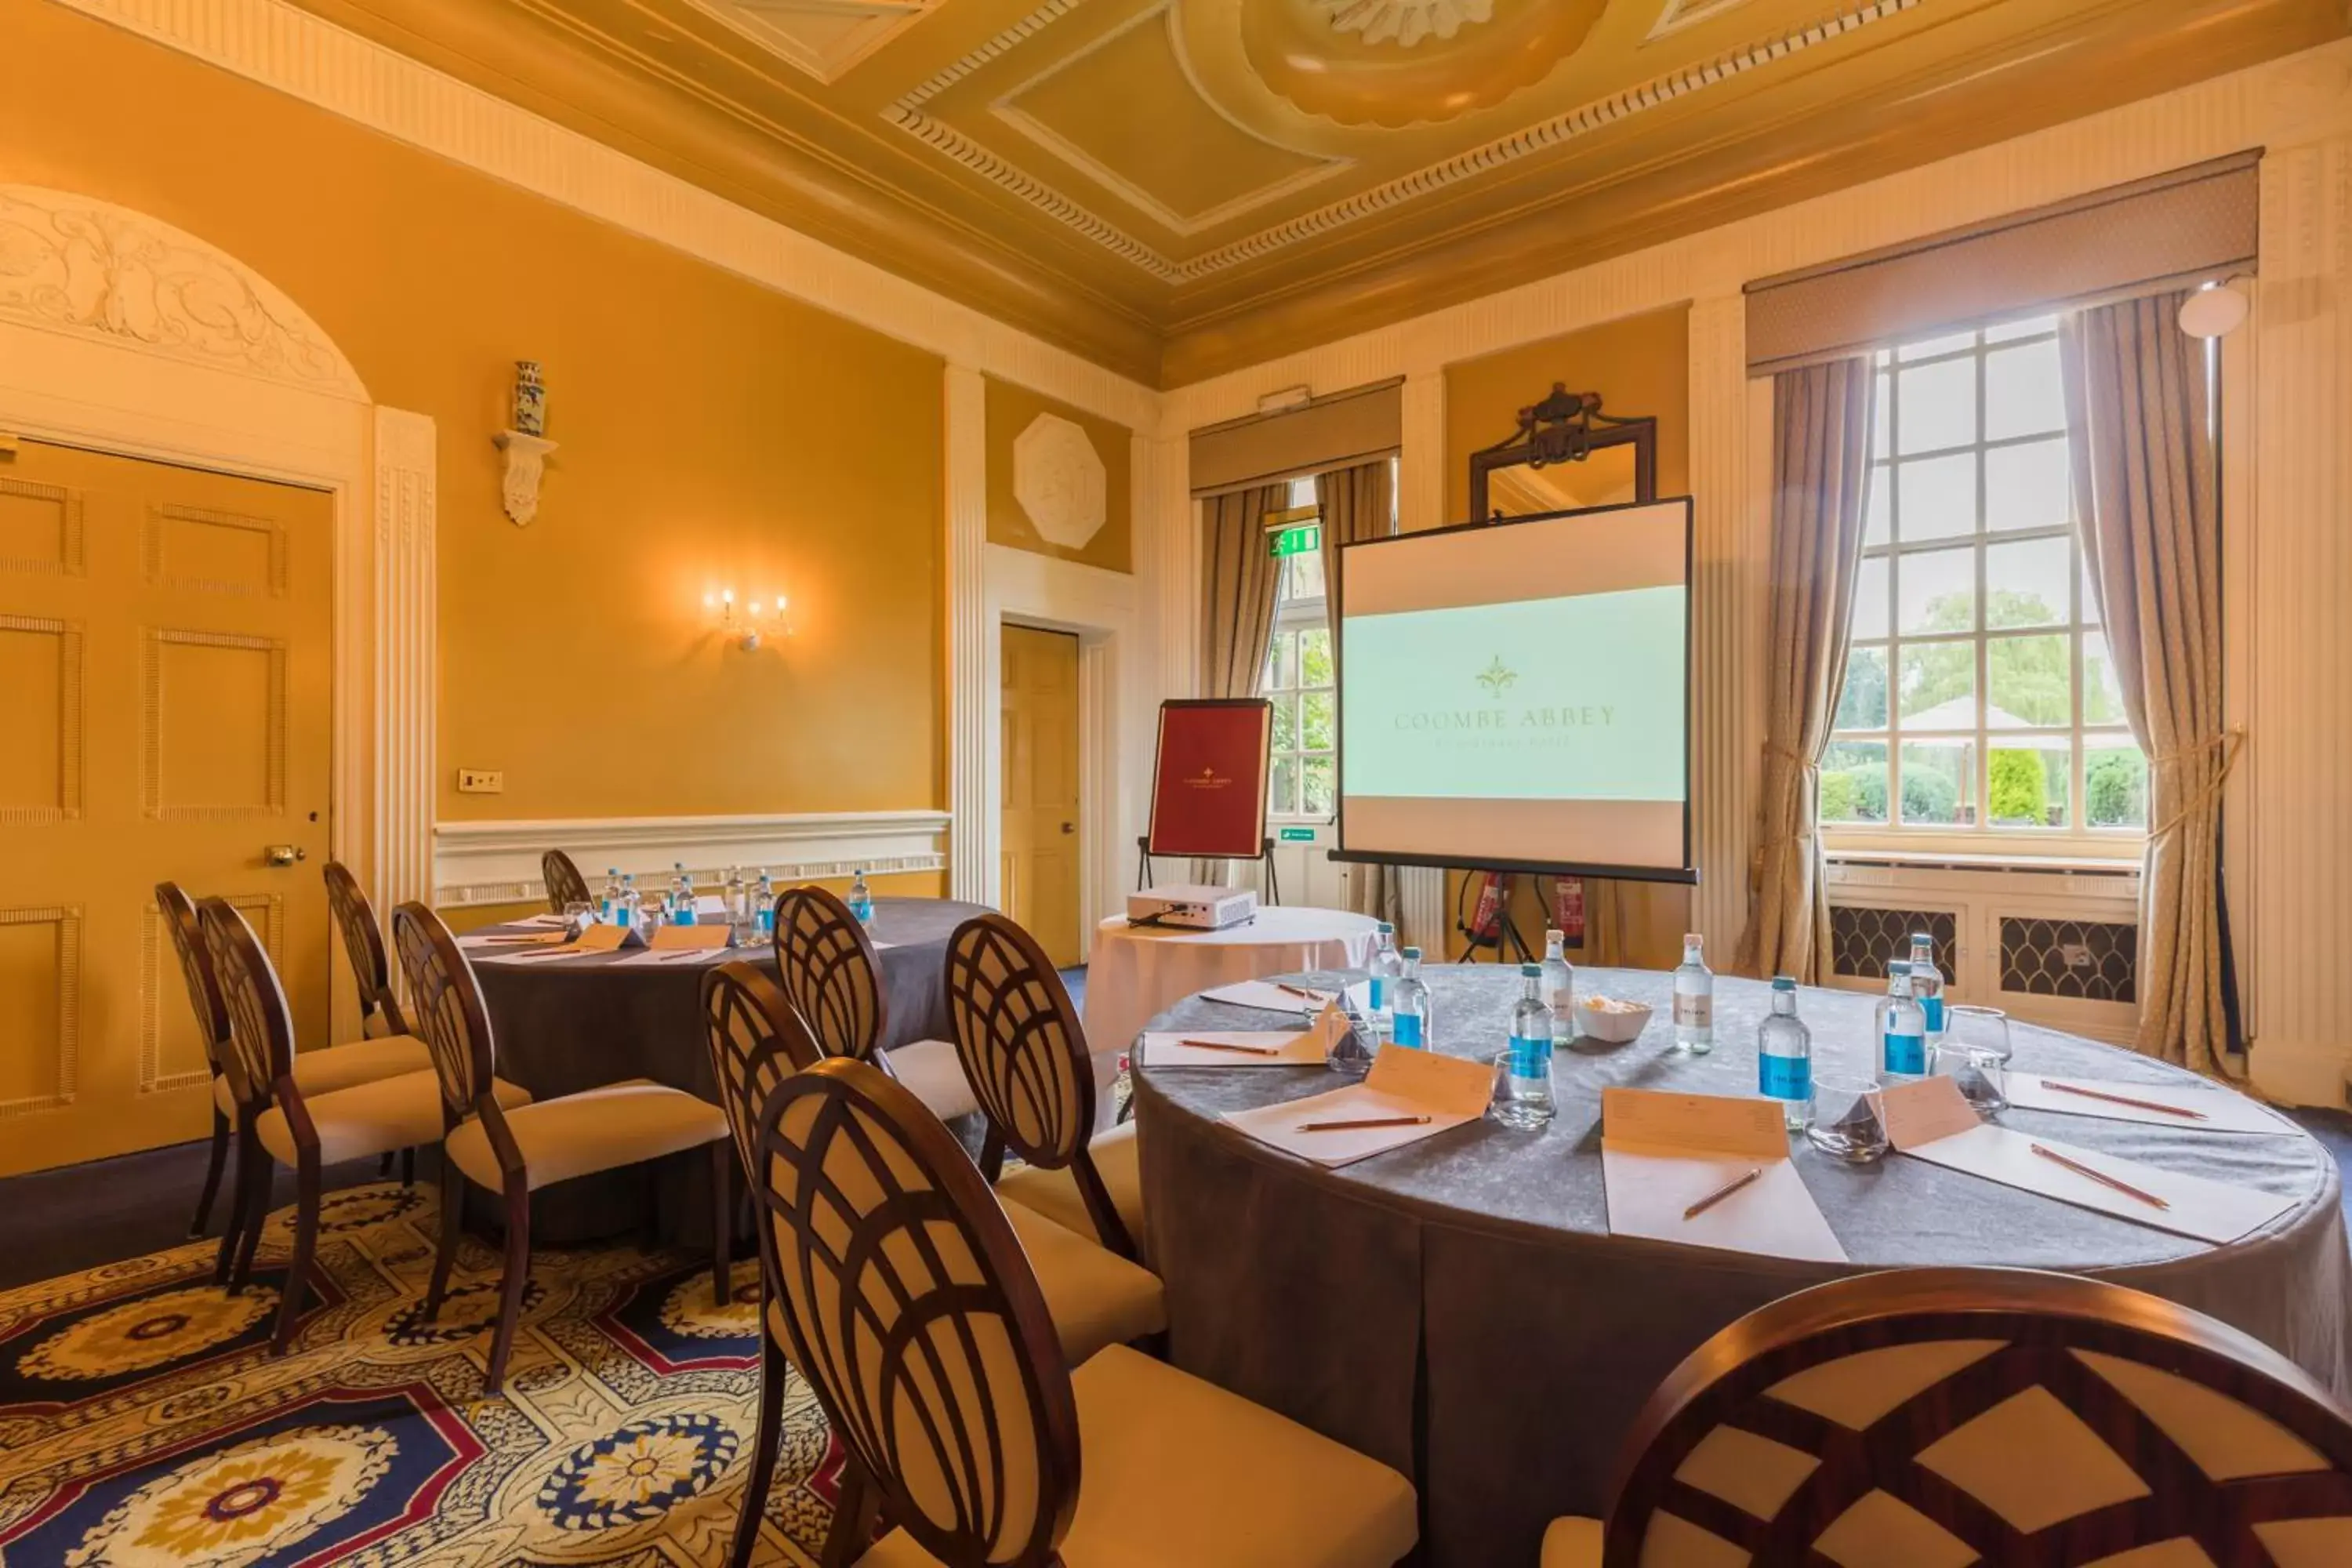 Meeting/conference room in Coombe Abbey Hotel